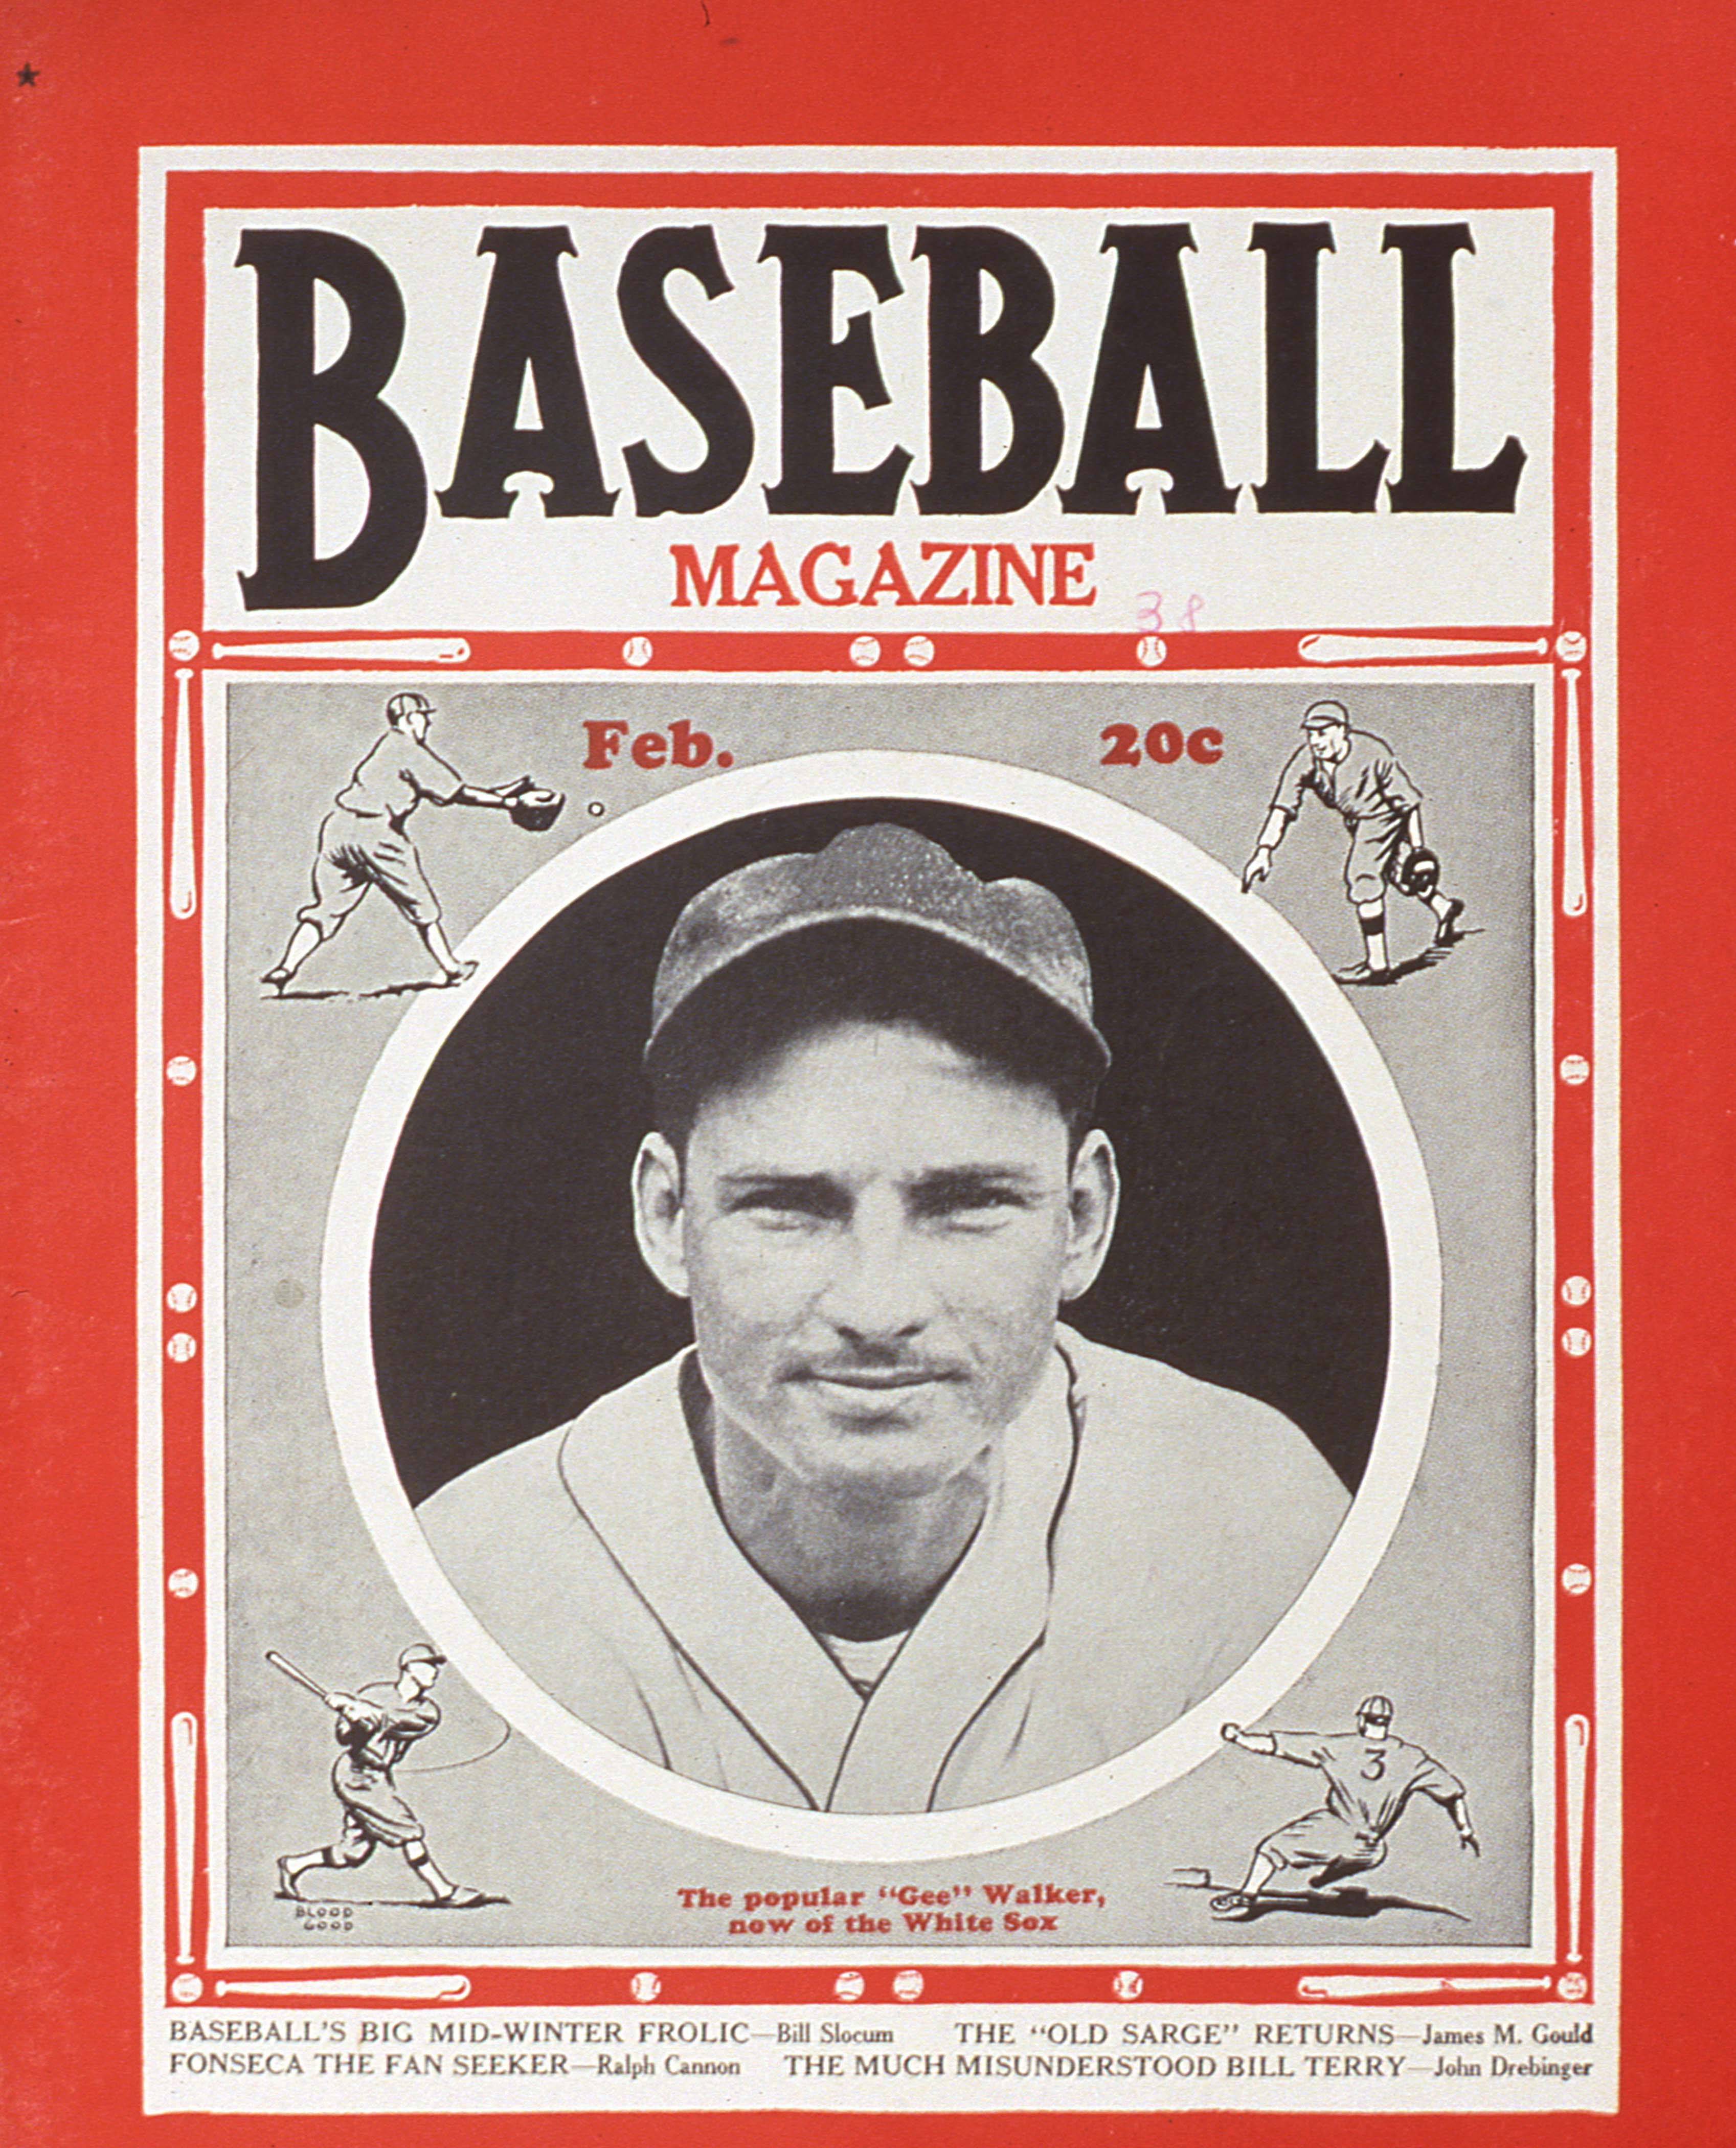 Baseball Magazine Cover With Gee Walker